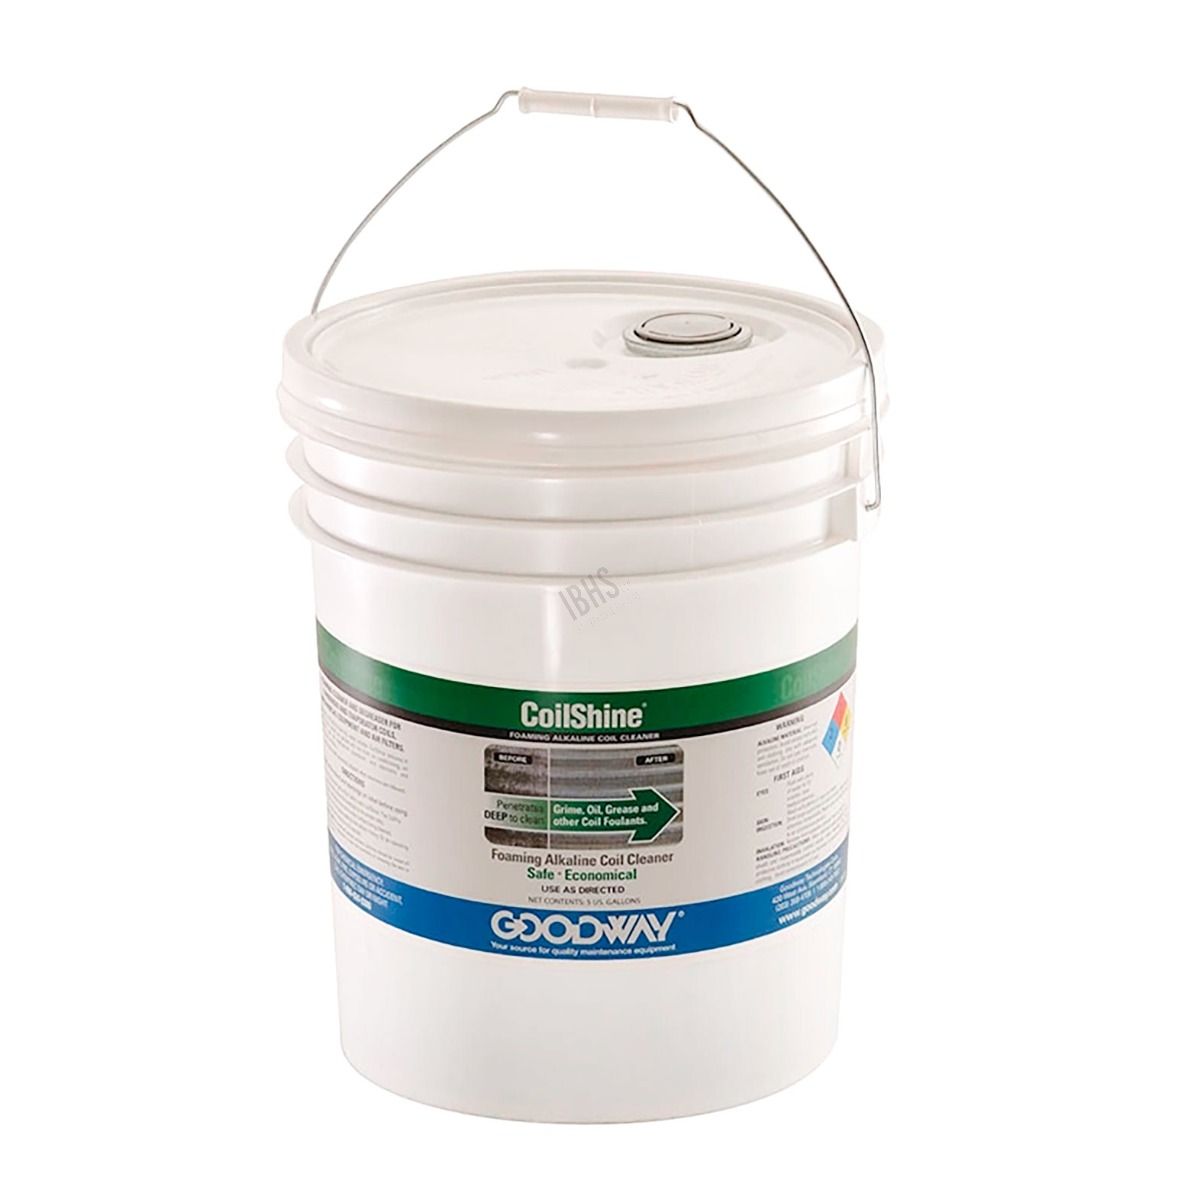 Coilshine 55 US Gallon in One Drum